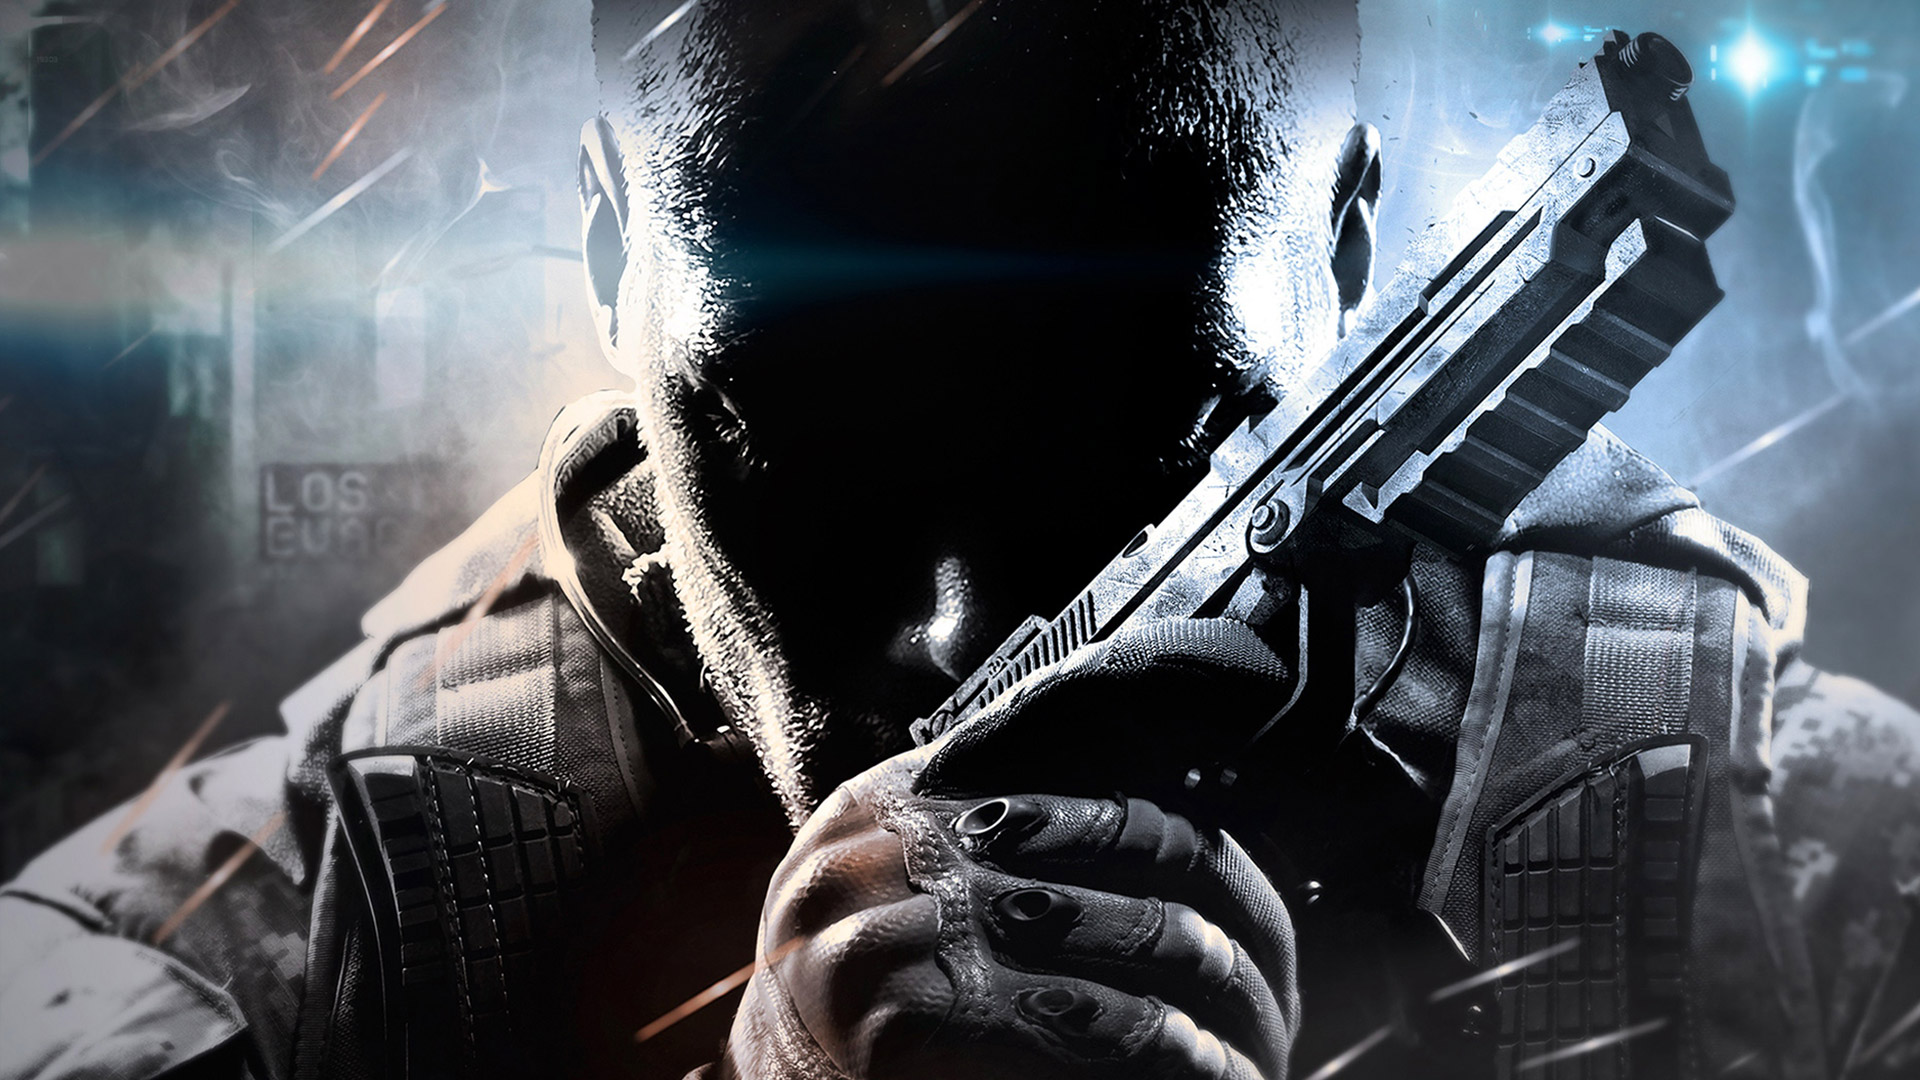 Free Call of Duty Black Ops 2 Wallpaper in 1920x1080